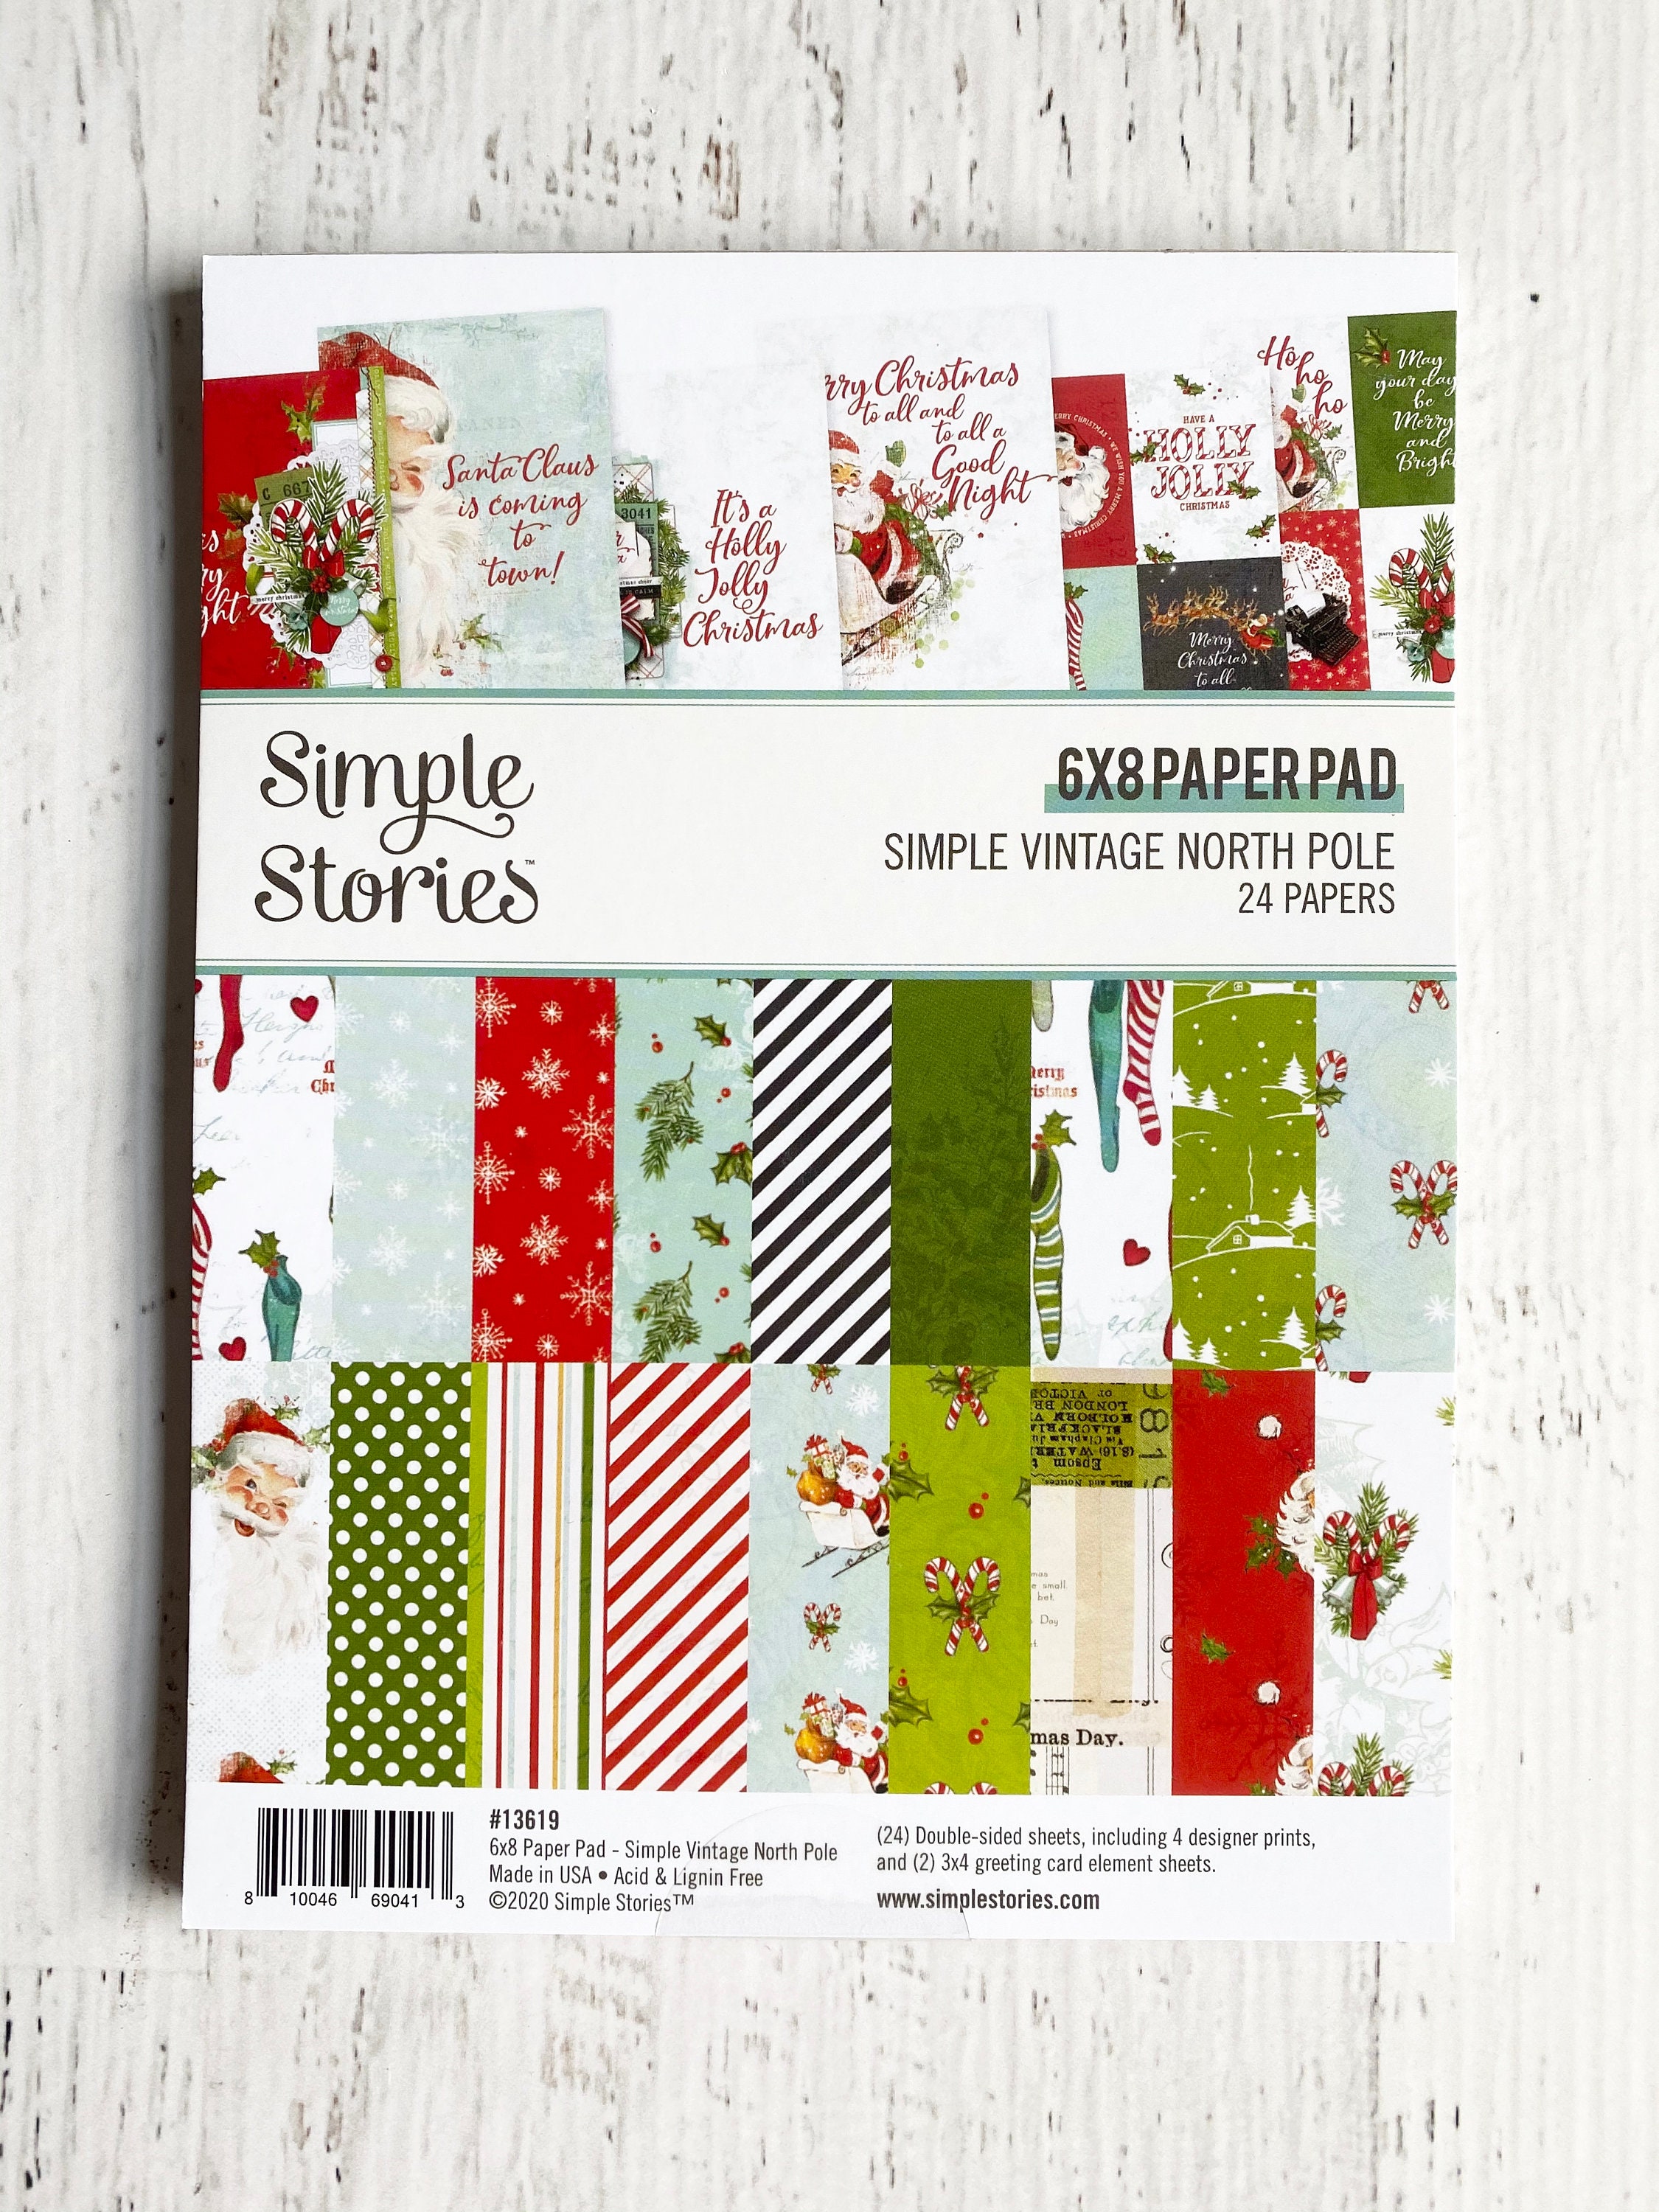  Christmas - Patterned Cardstock Paper Pad - Double Sided - 6x8 - 40 Sheets